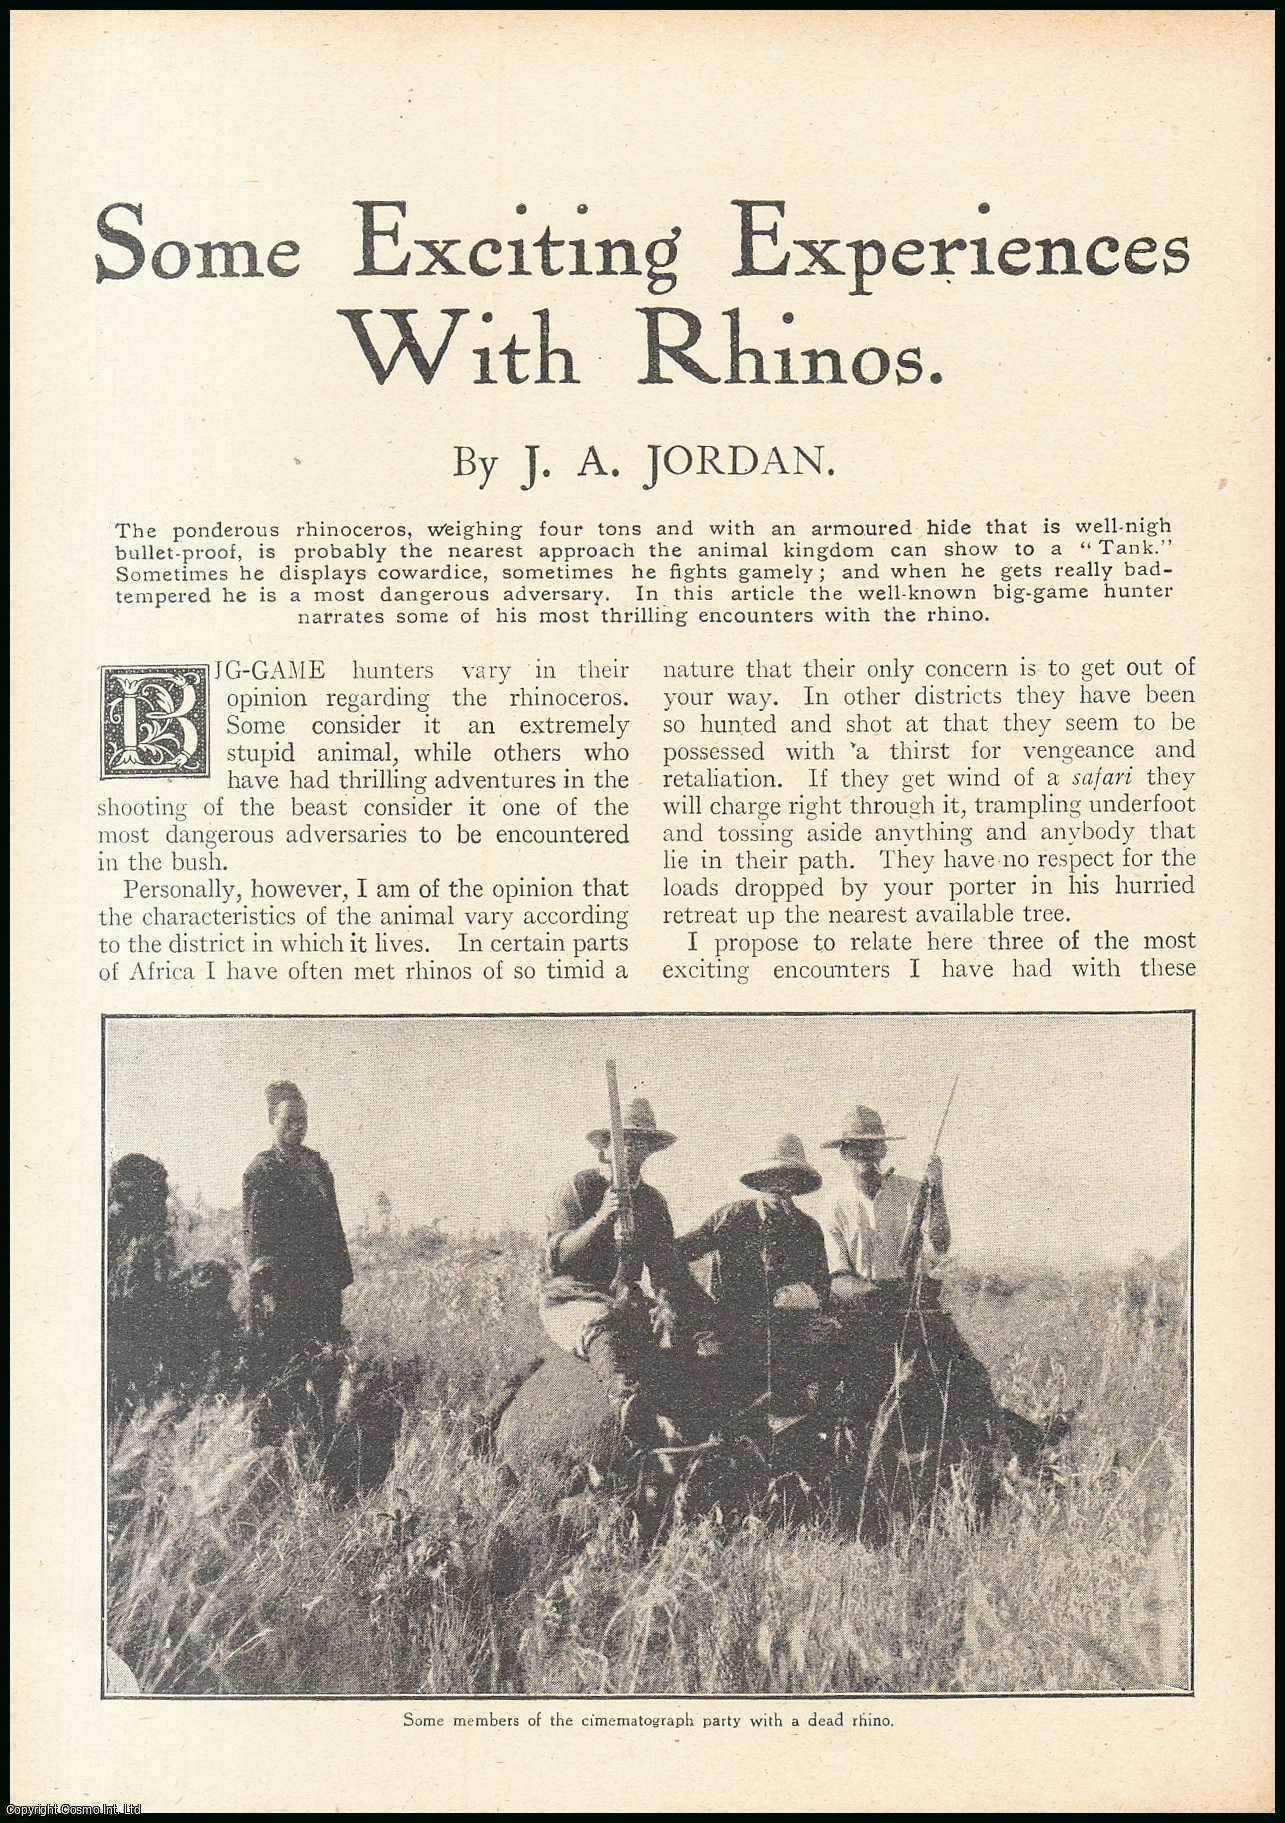 J.A. Jordan - Rhino Hunting in Africa : some exciting experiences with Rhinos. An uncommon original article from the Wide World Magazine, 1917.